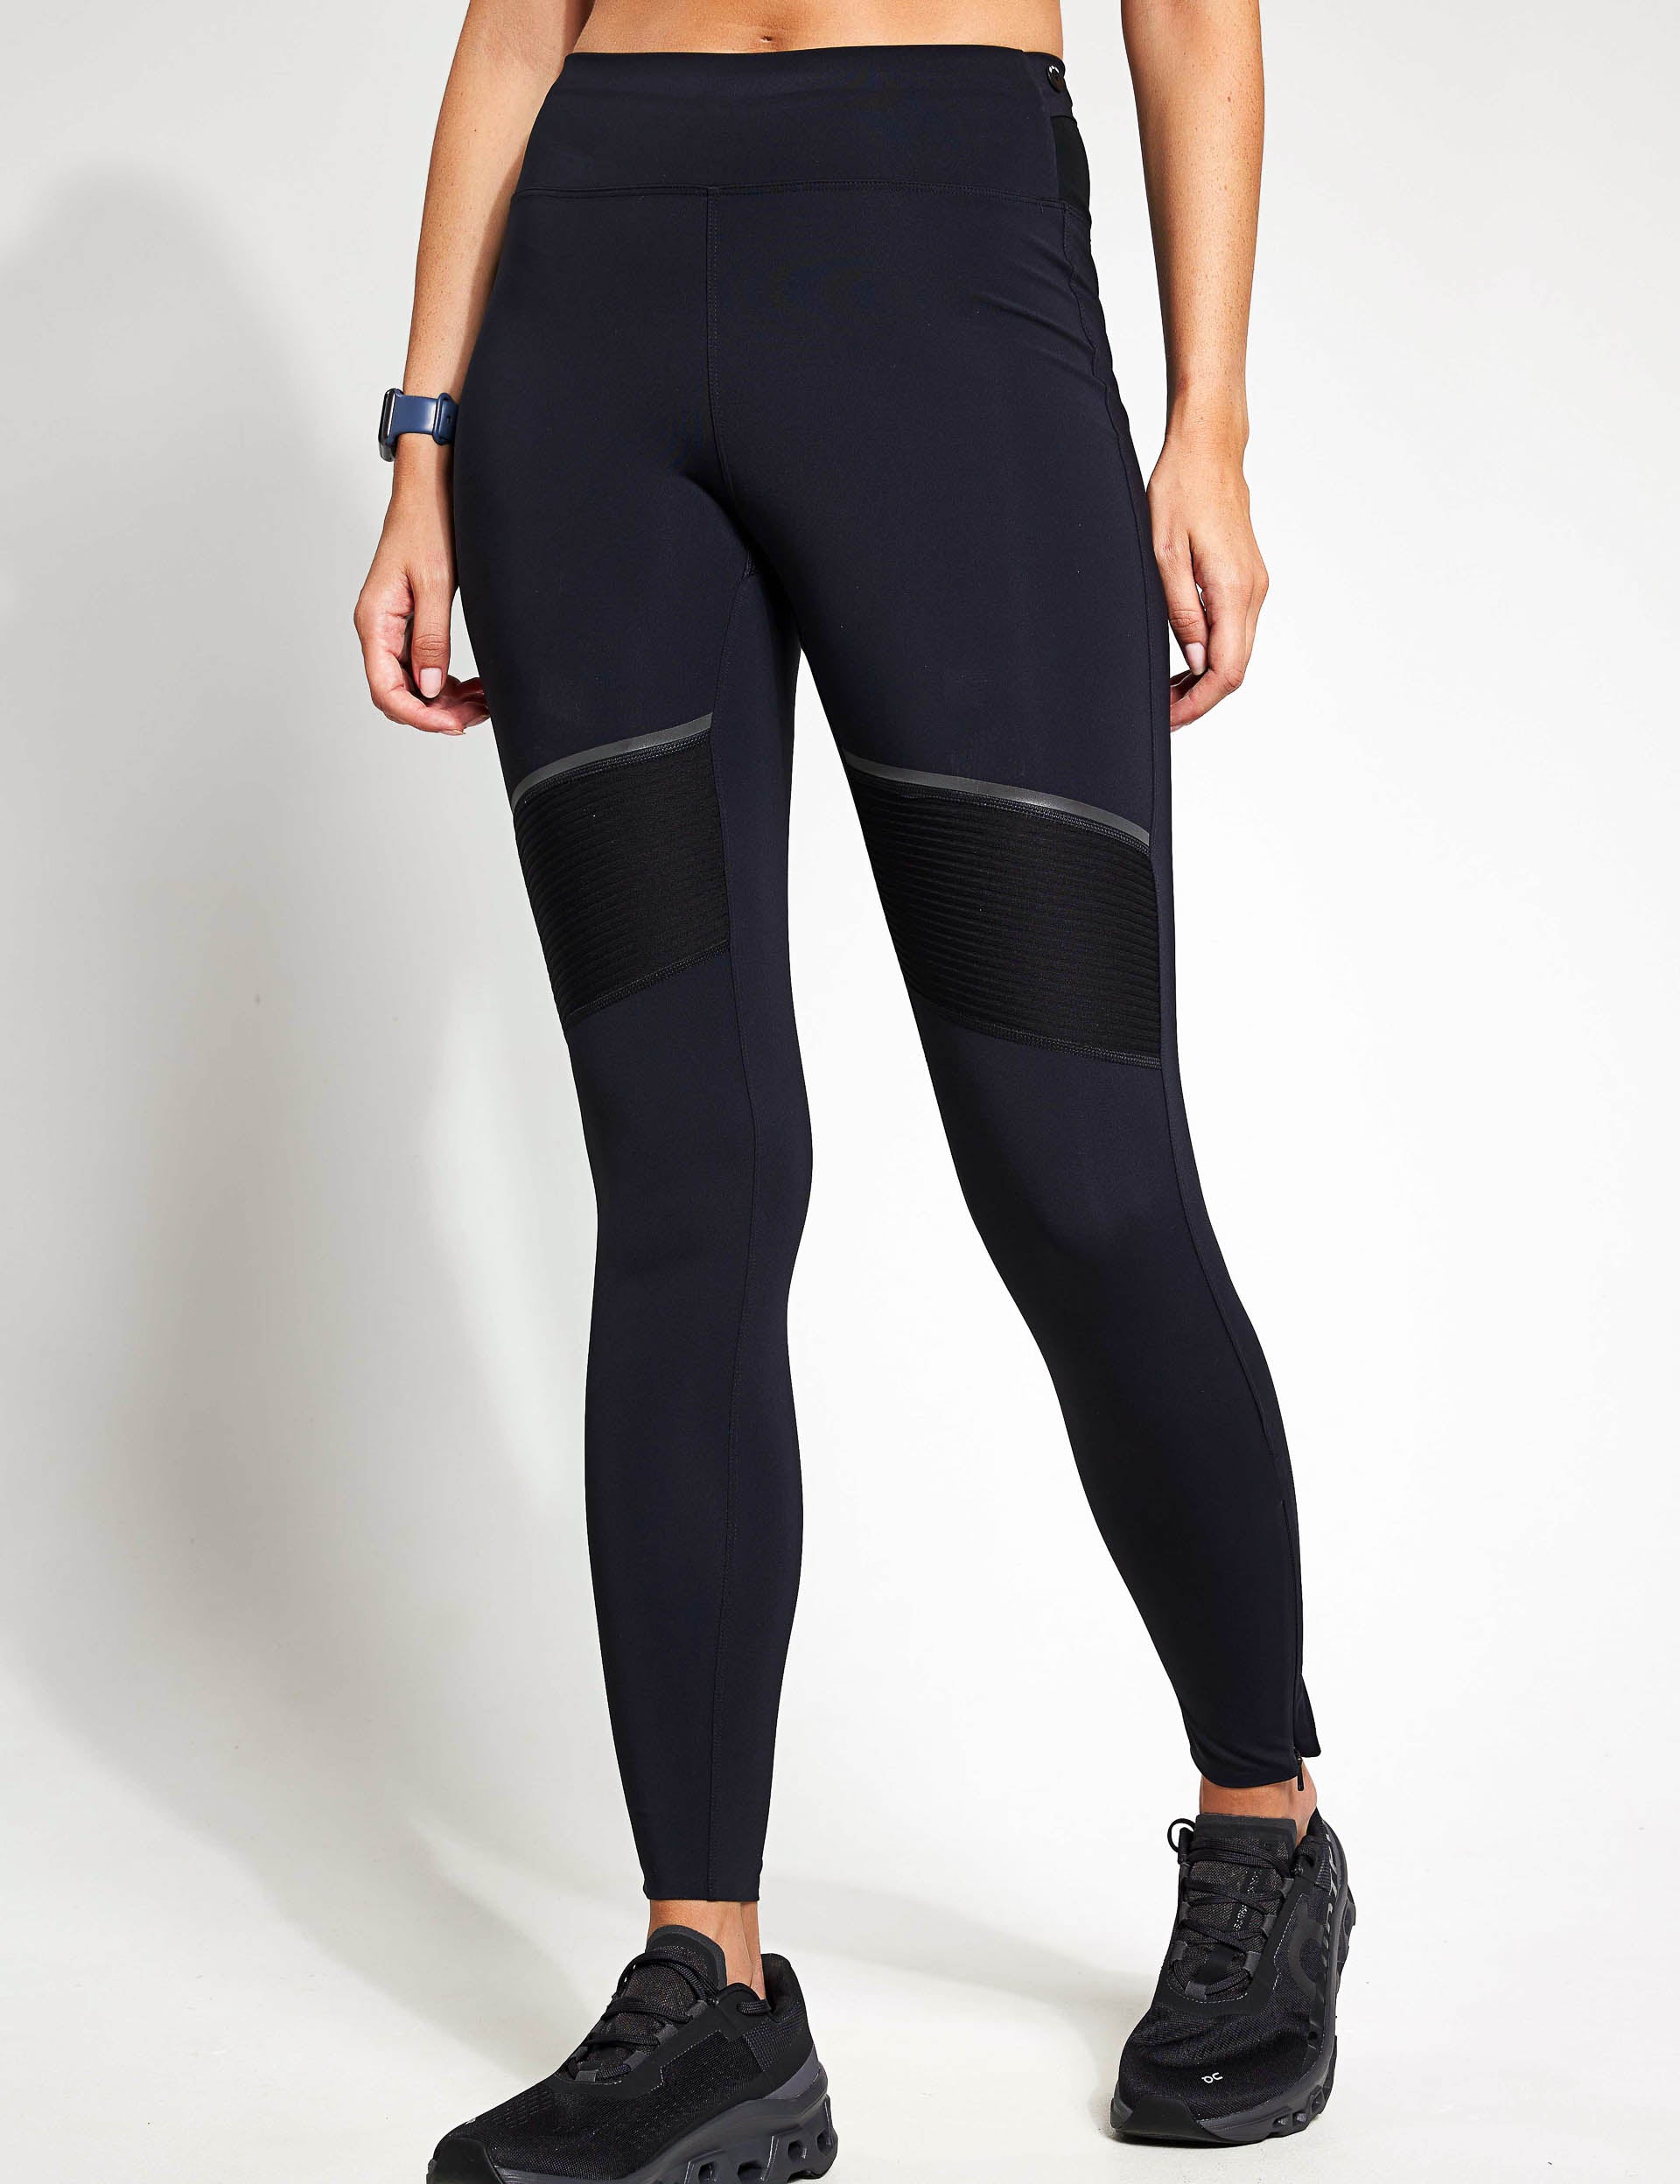 On Cloud - running long pants for women Movement Long Tights